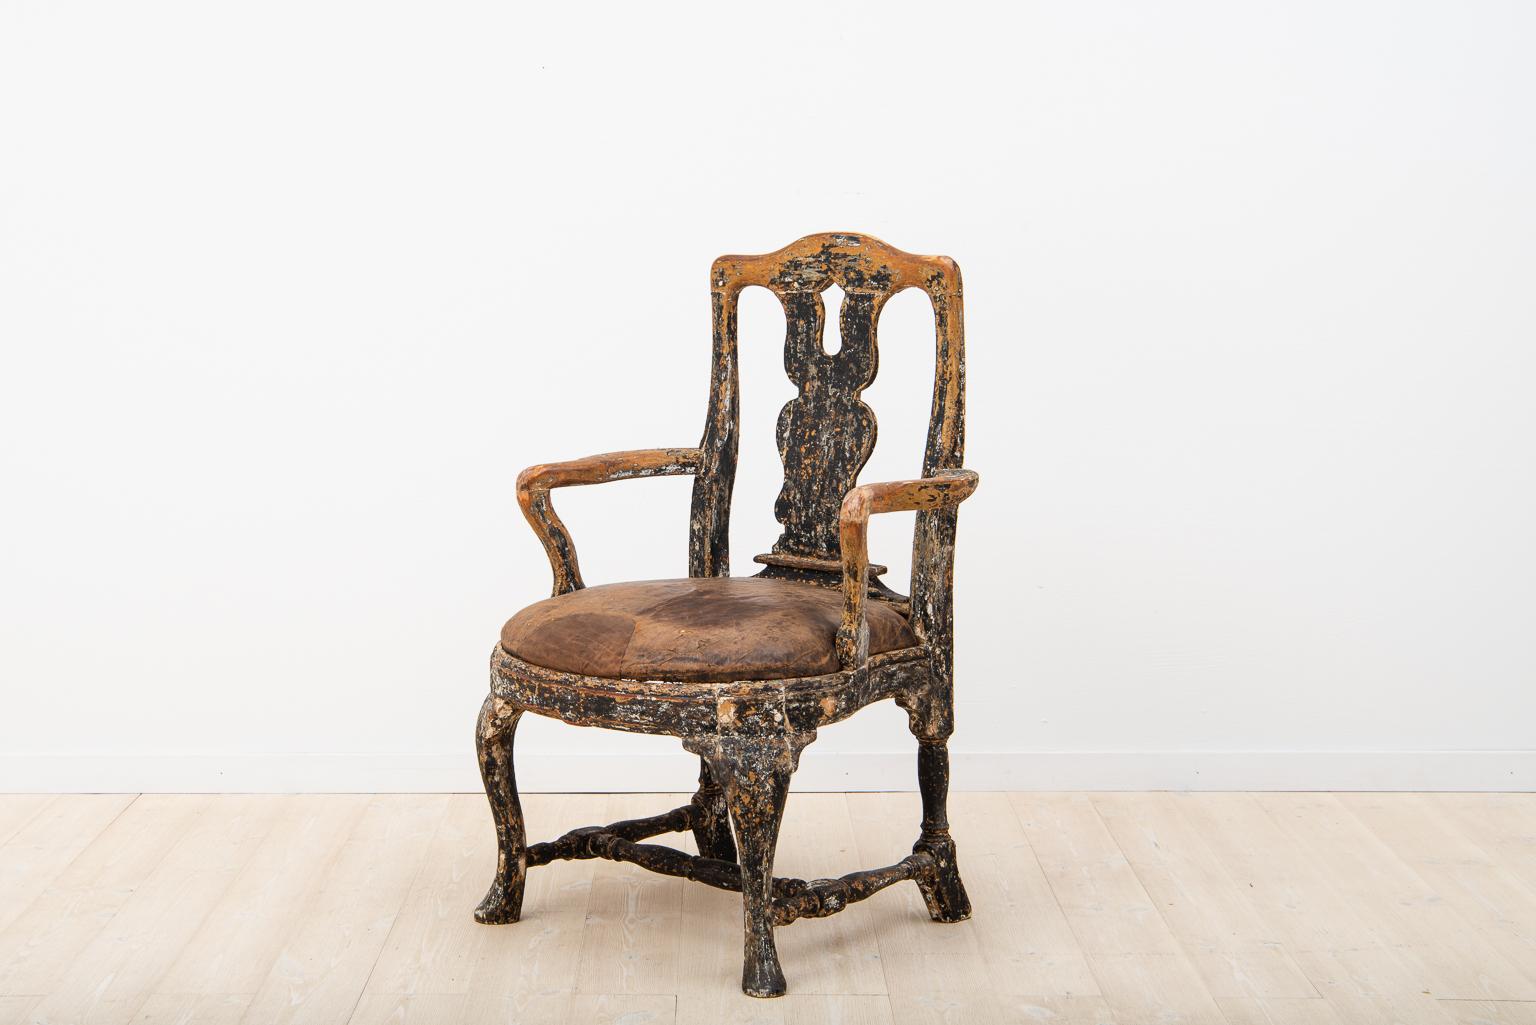 Swedish baroque armchair that’s been dry scraped to the black original paint. Seat with the old original dressing in leather. The leather has traces of older repairs and some wear. For occasional use it would work well. But in instance of daily use